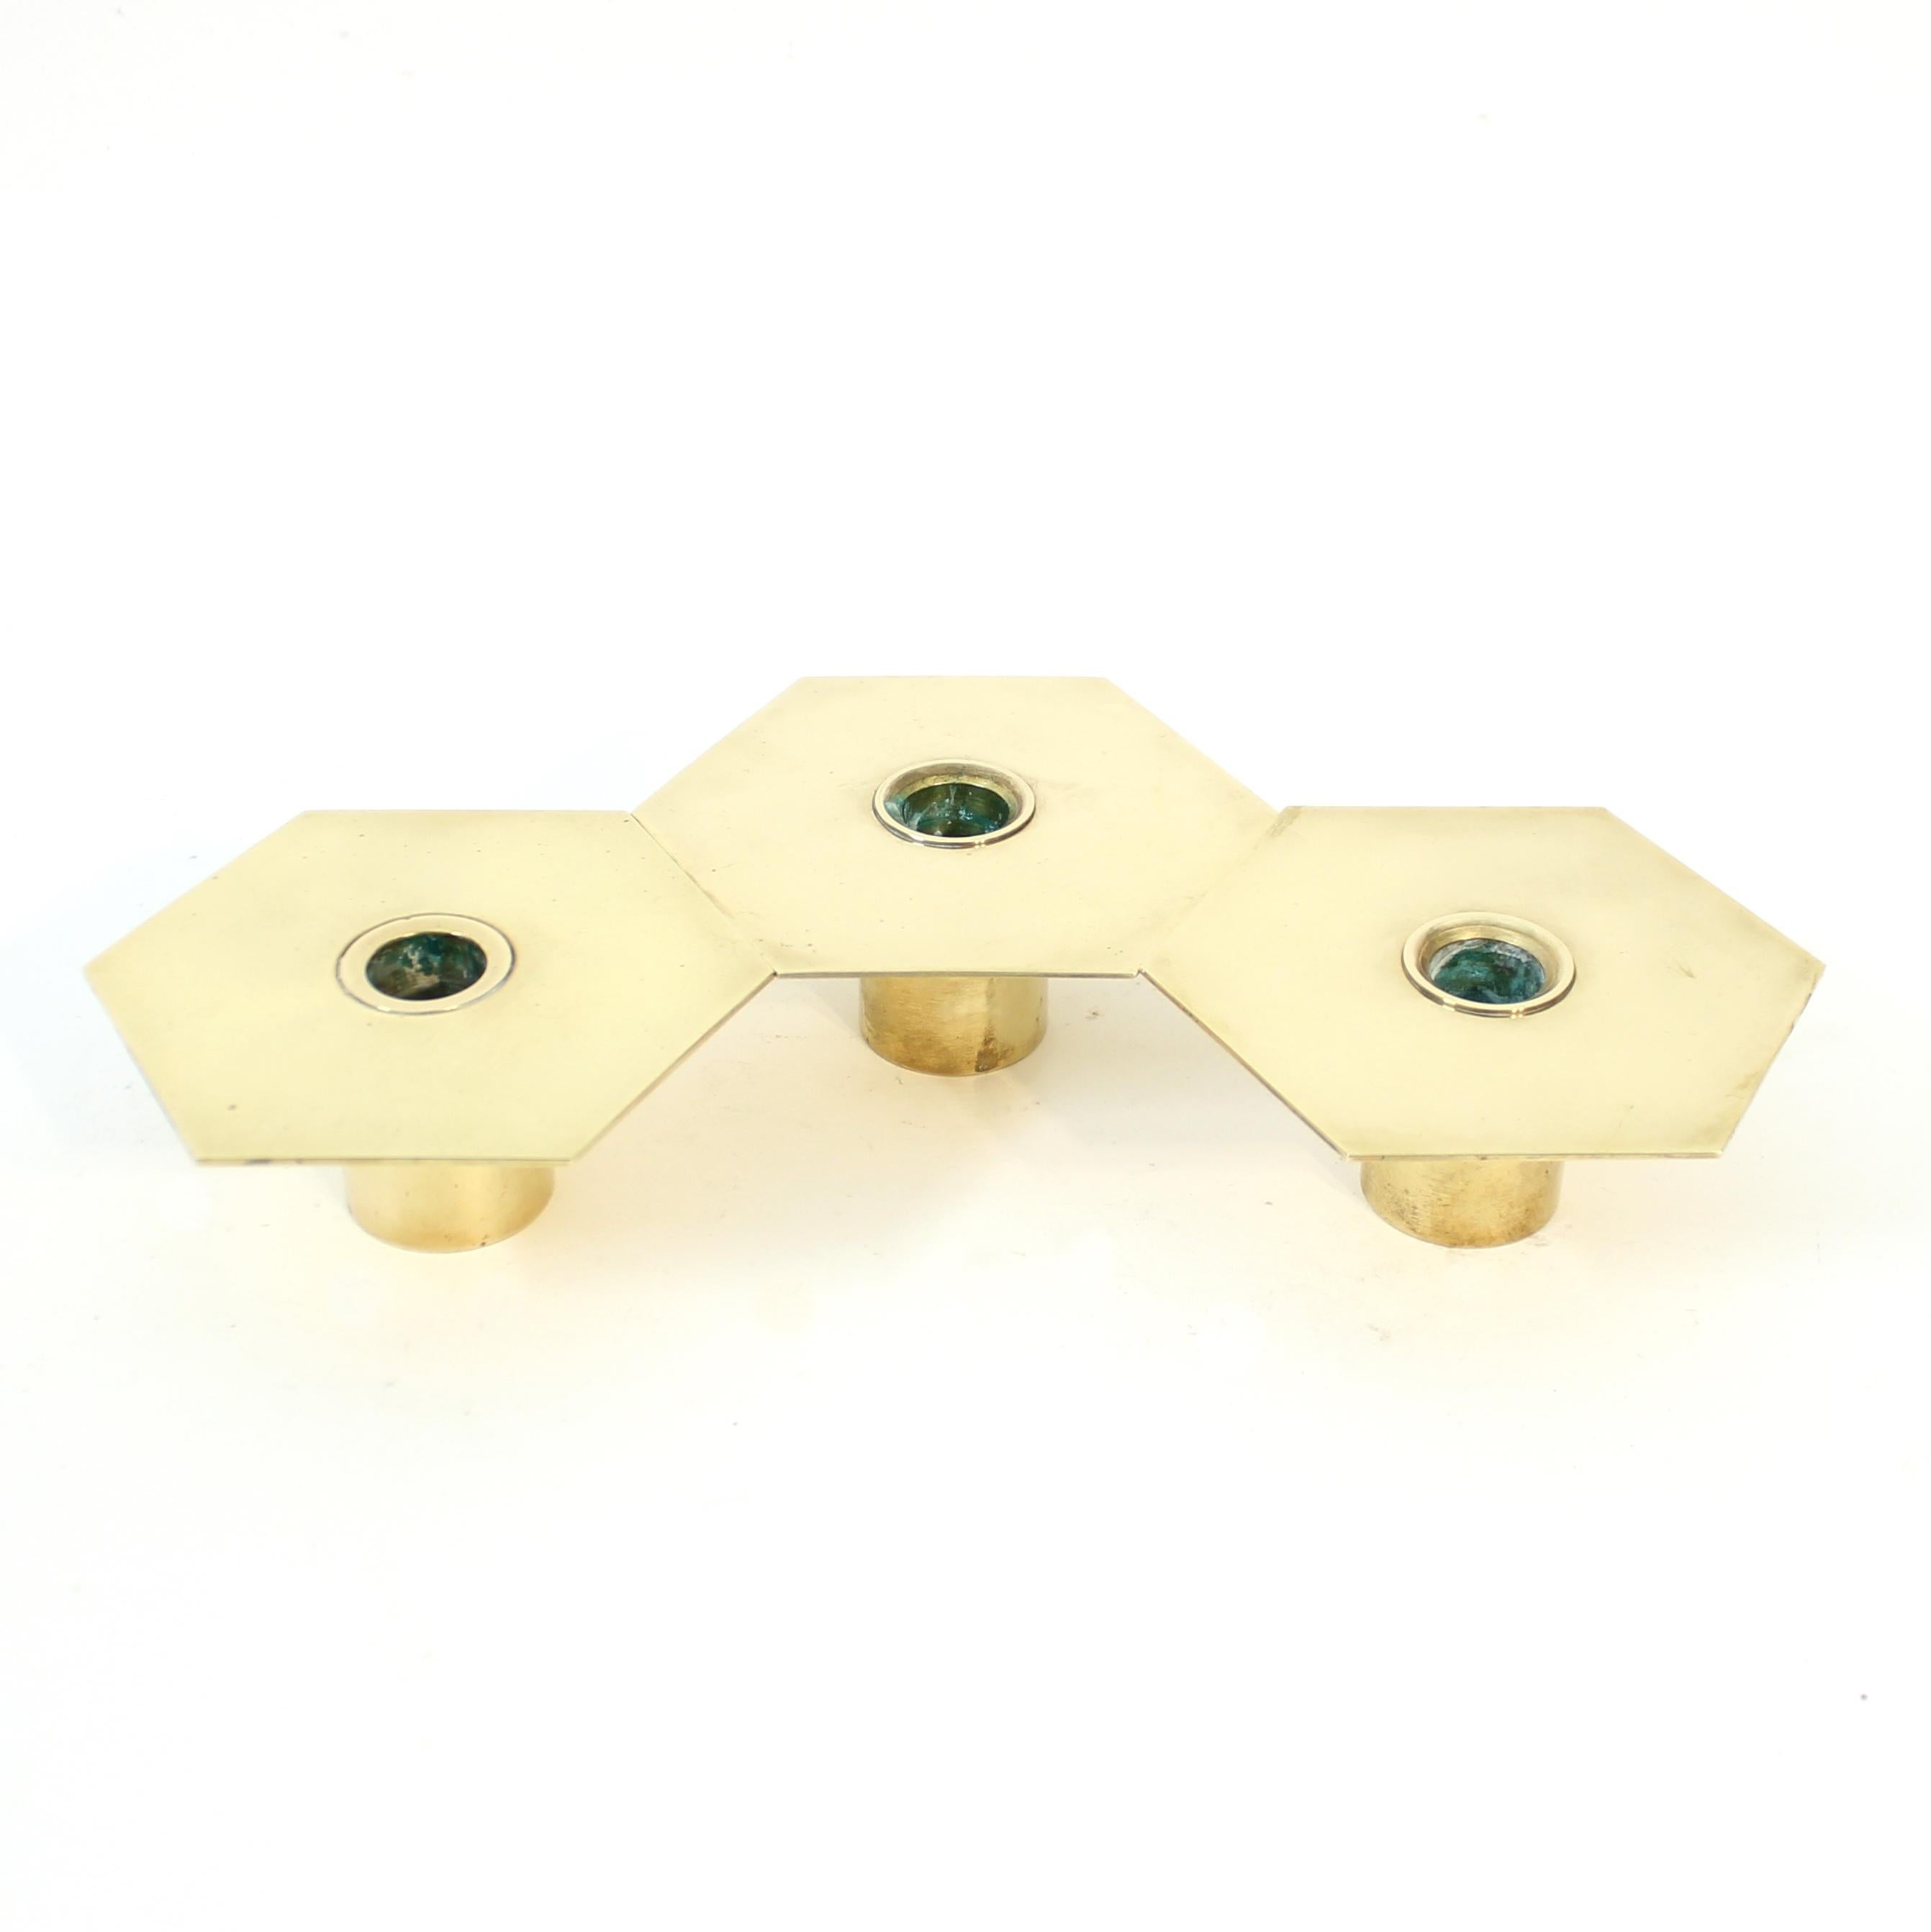 Sigurd Persson, set of 3 brass Romb candle holders, 1980s For Sale 1